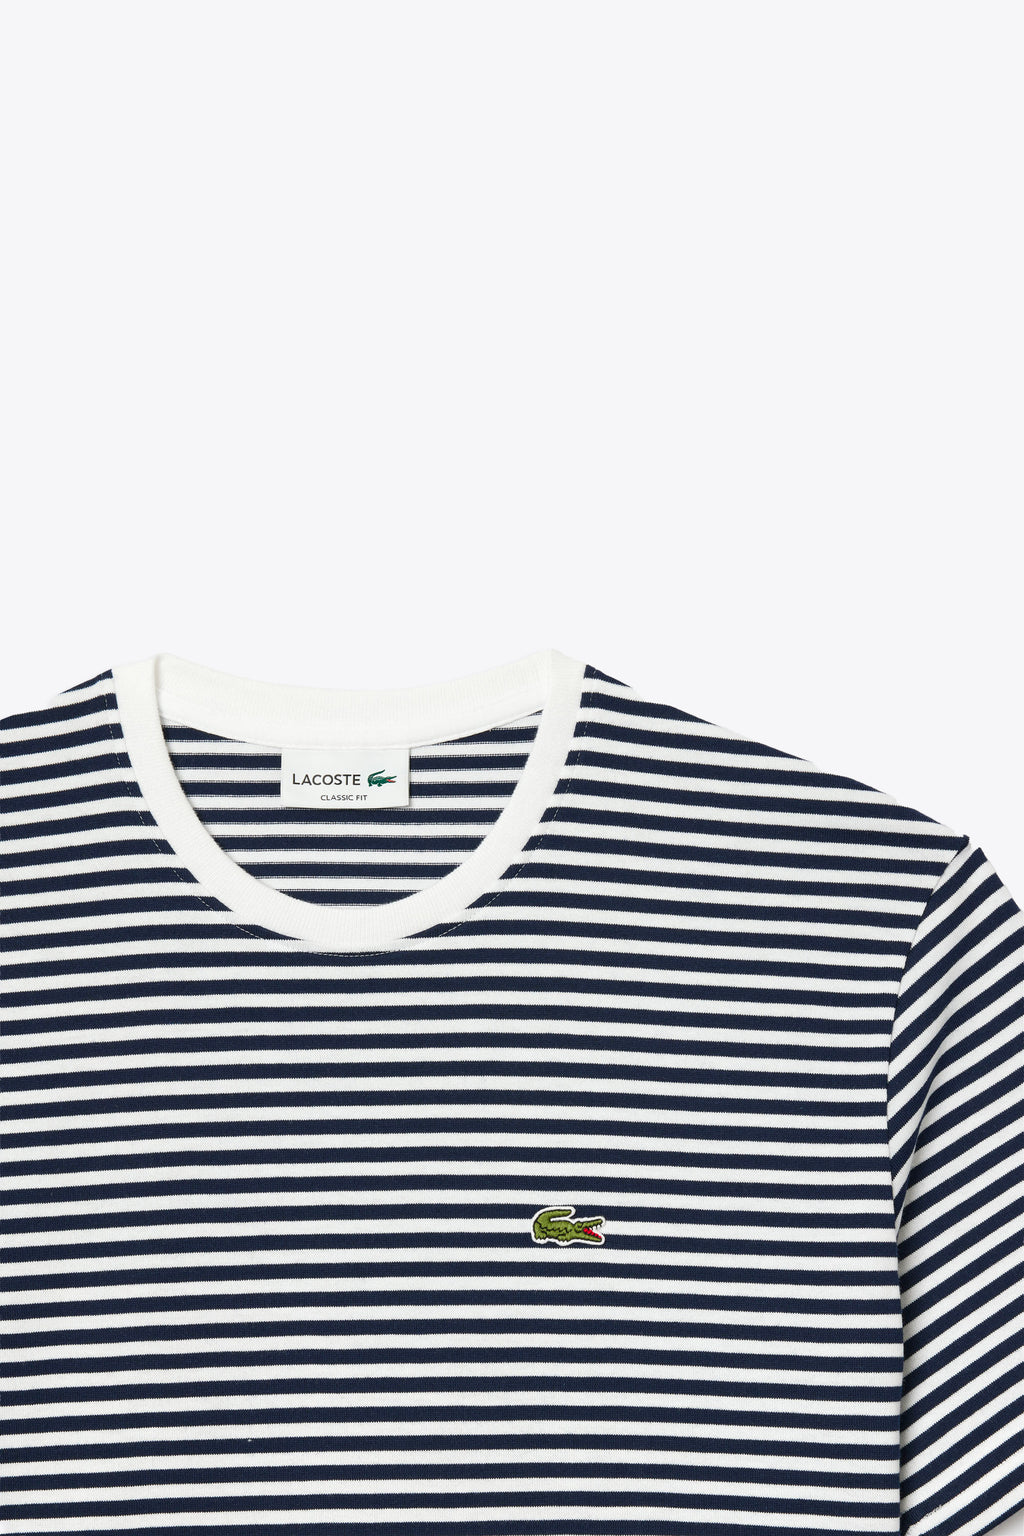 alt-image__Navy-blue/white-striped-t-shirt-with-logo-patch